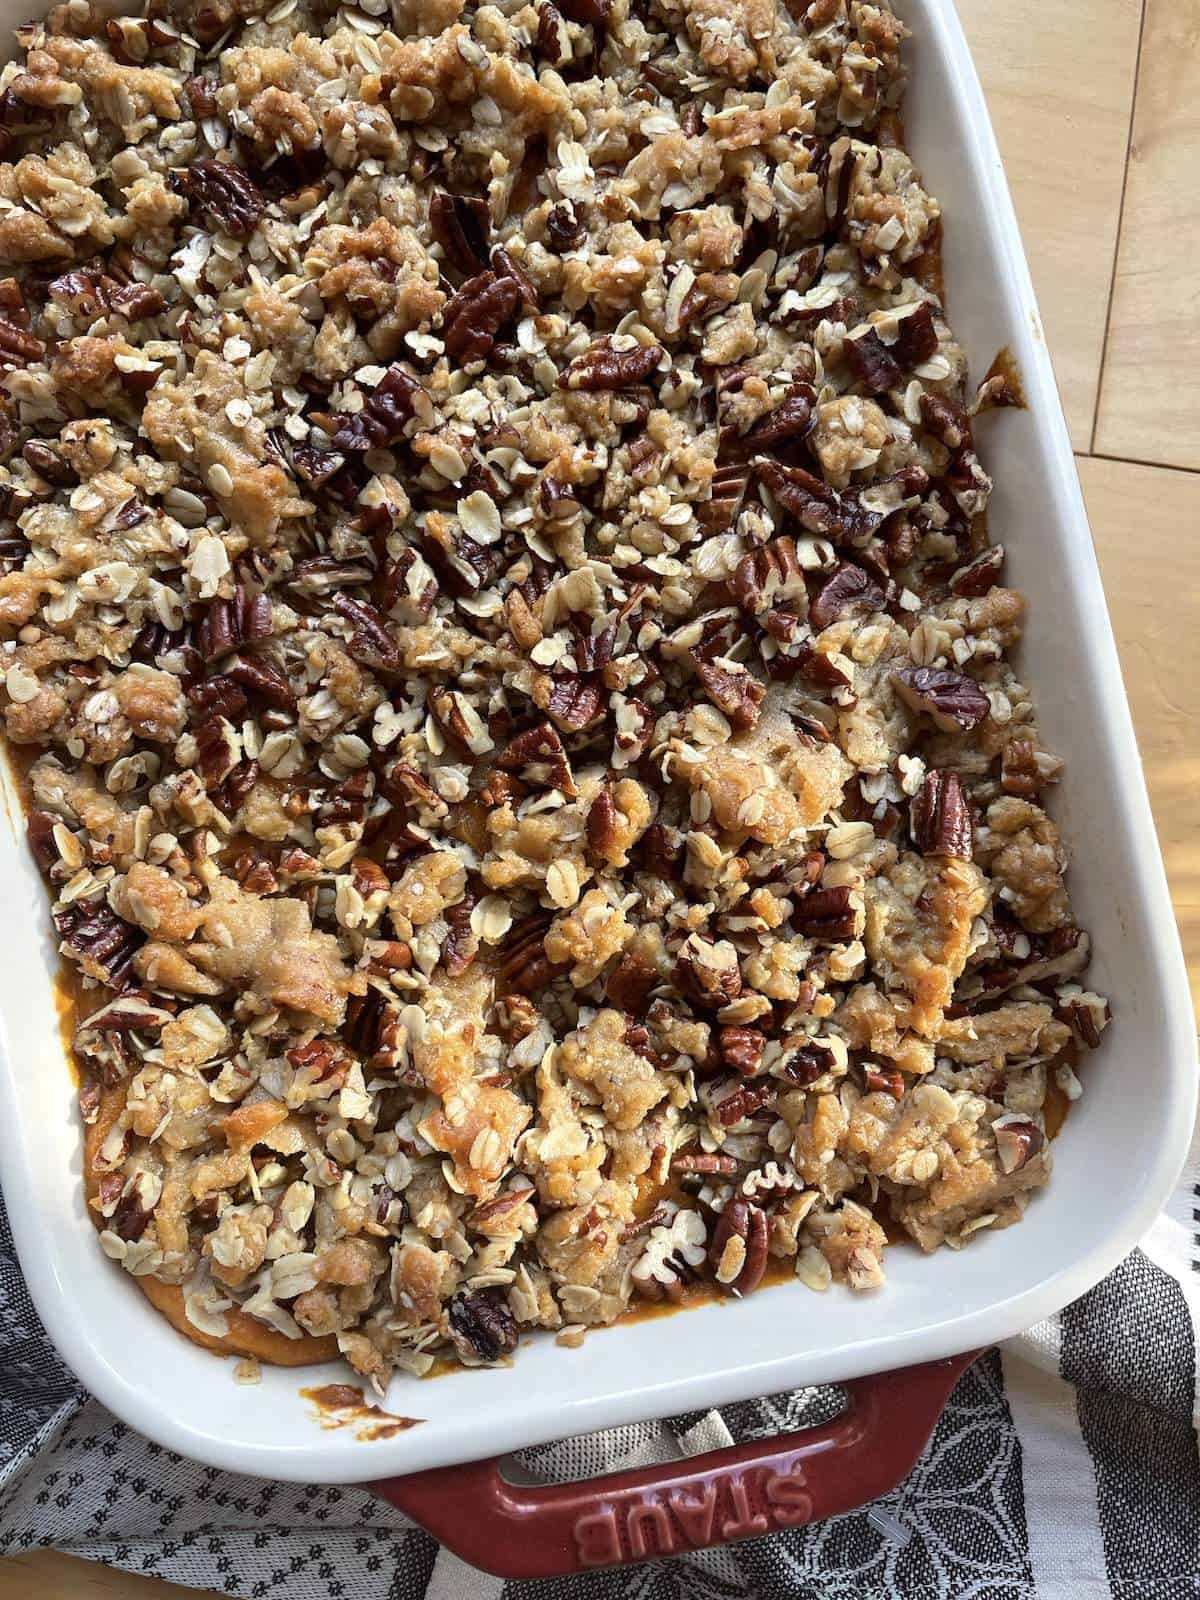 A pan of sweet potato casserole with pecan praline topping.